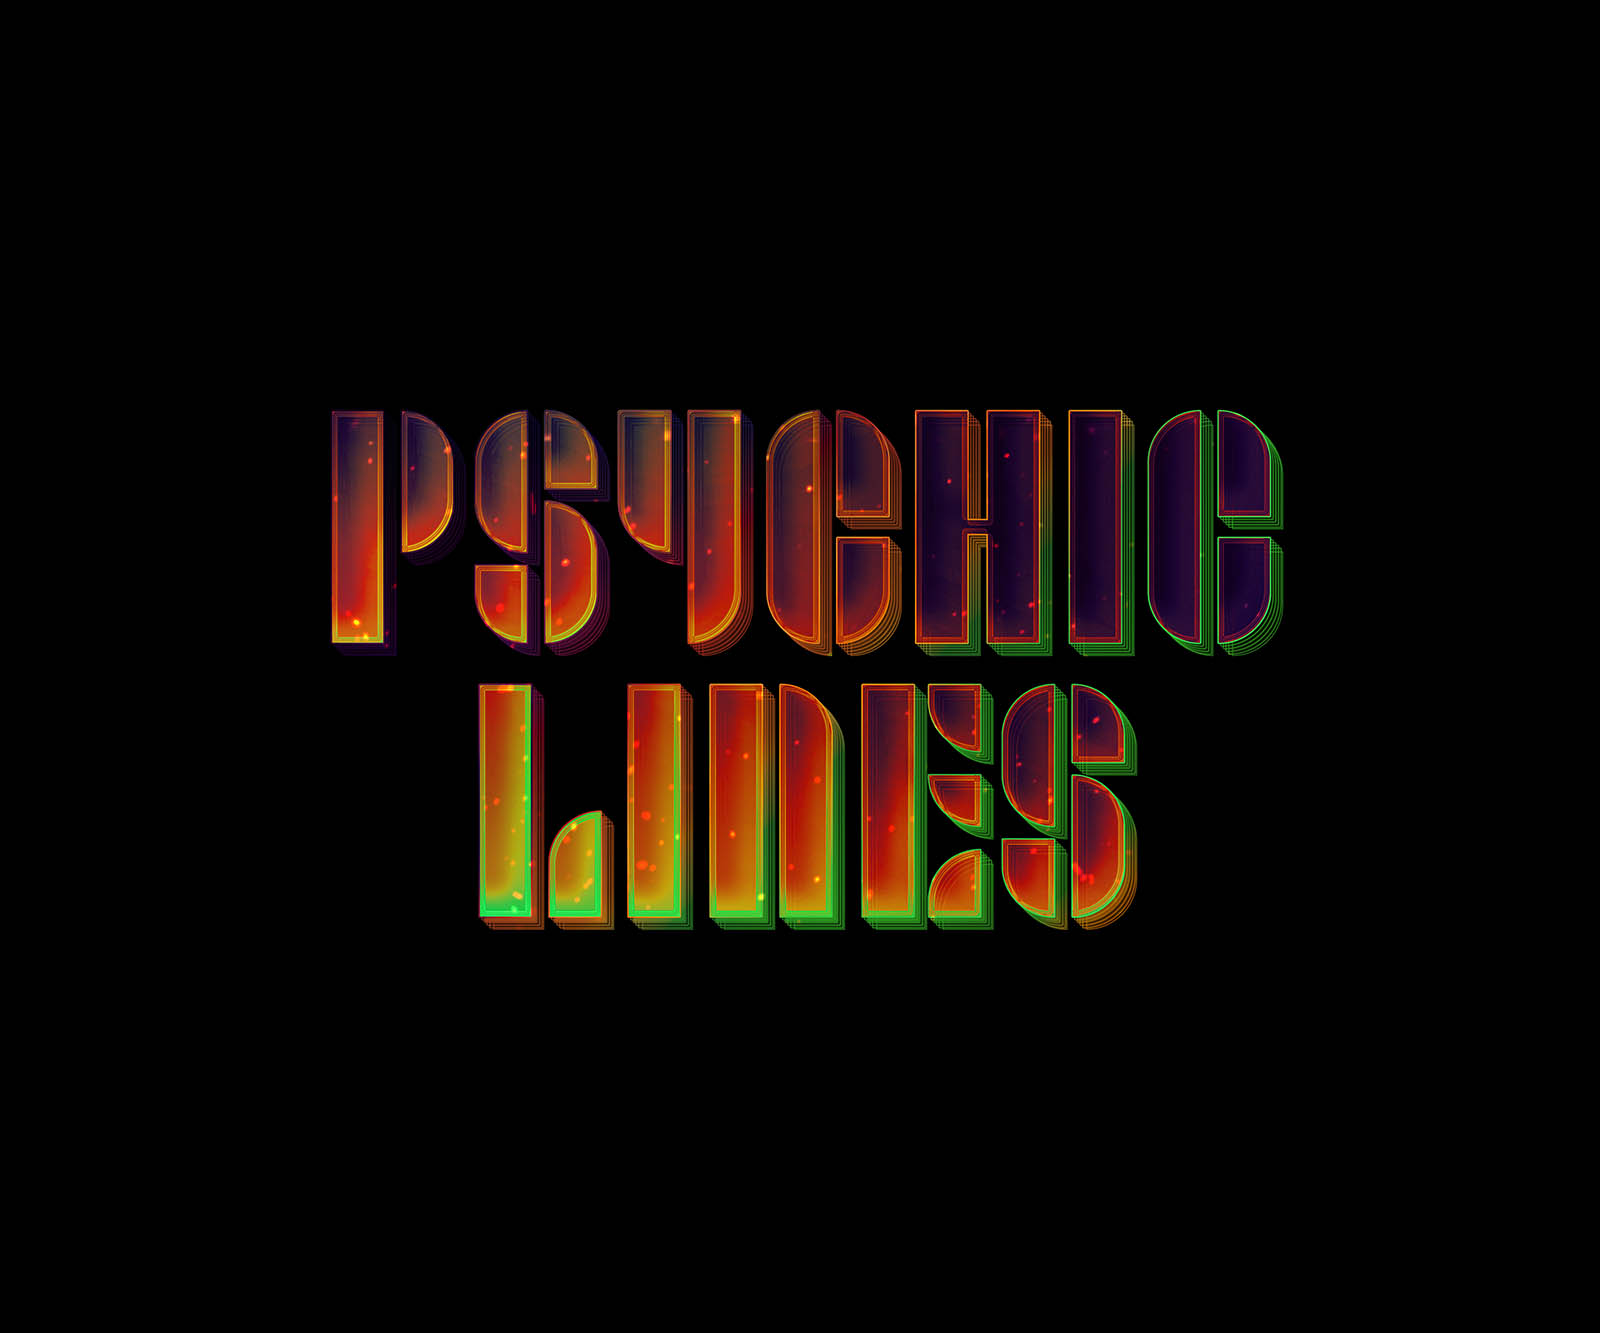 Photoshop psychic lines text effect